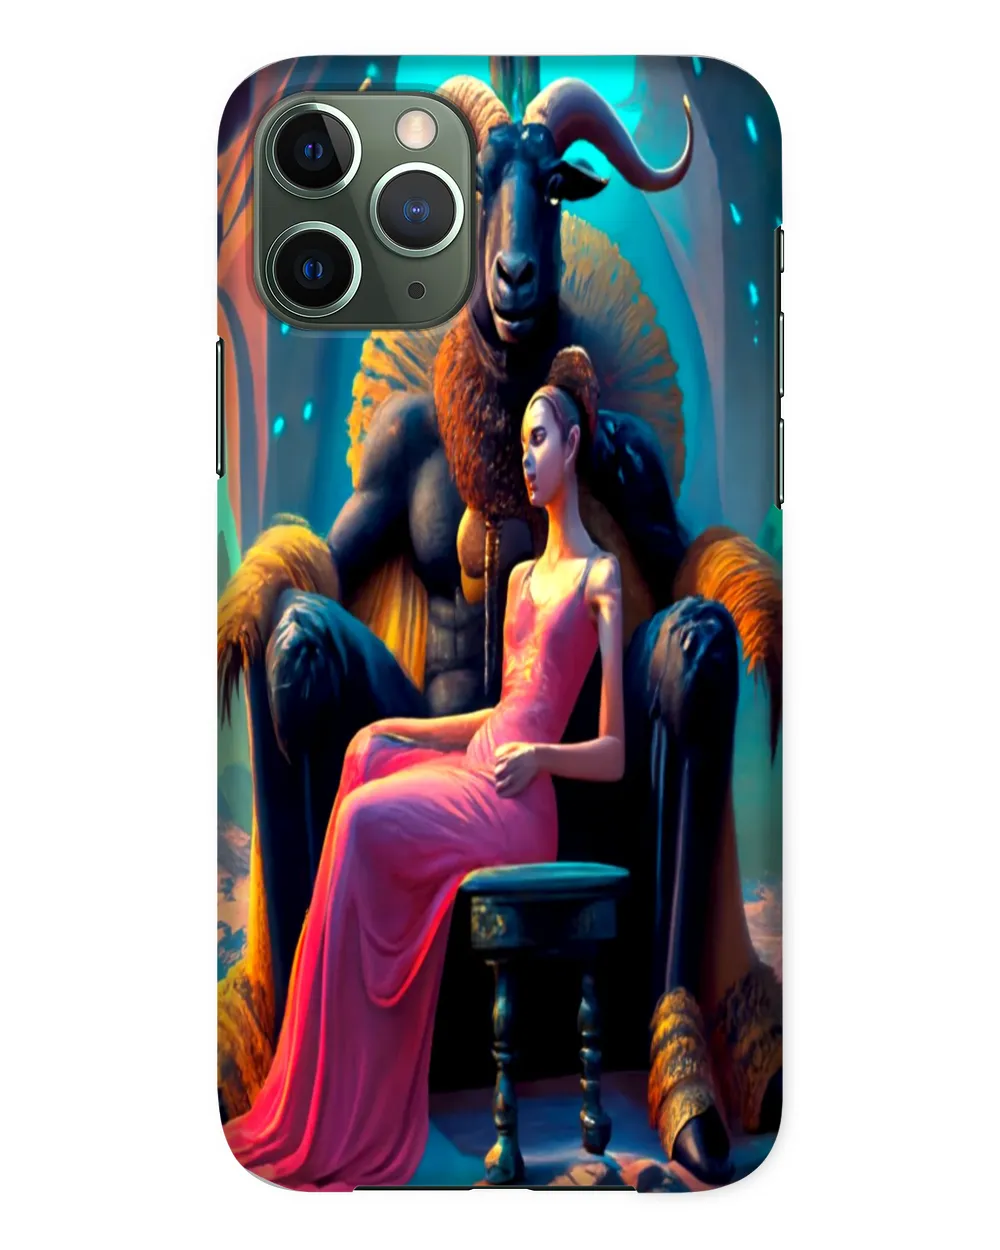 Black Throne Goat With Woman